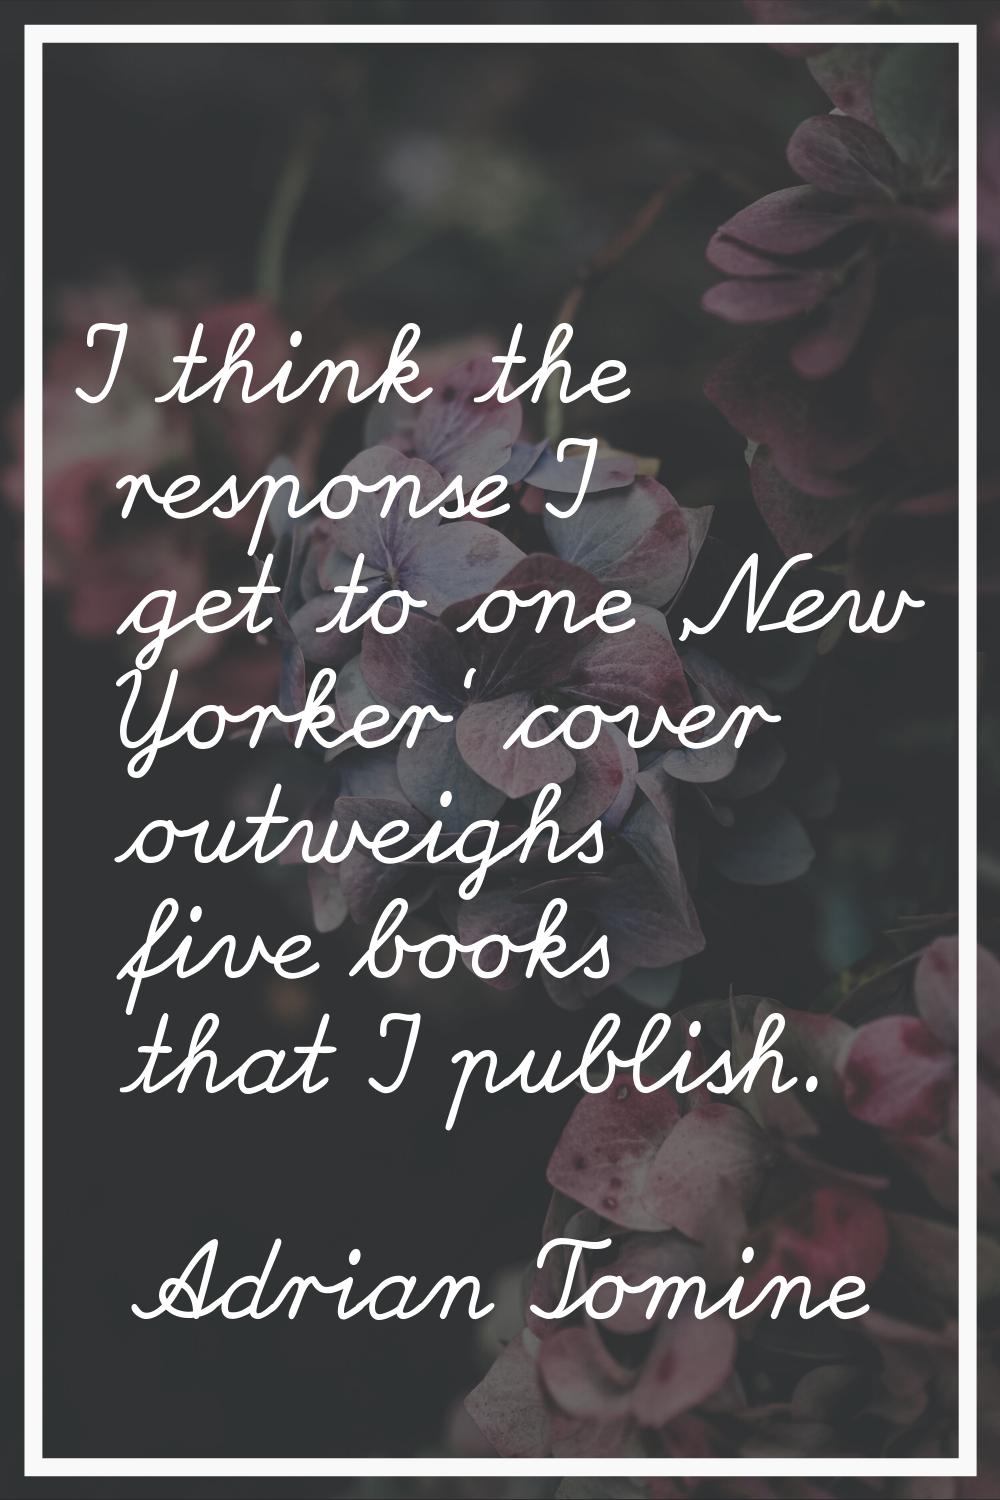 I think the response I get to one 'New Yorker' cover outweighs five books that I publish.